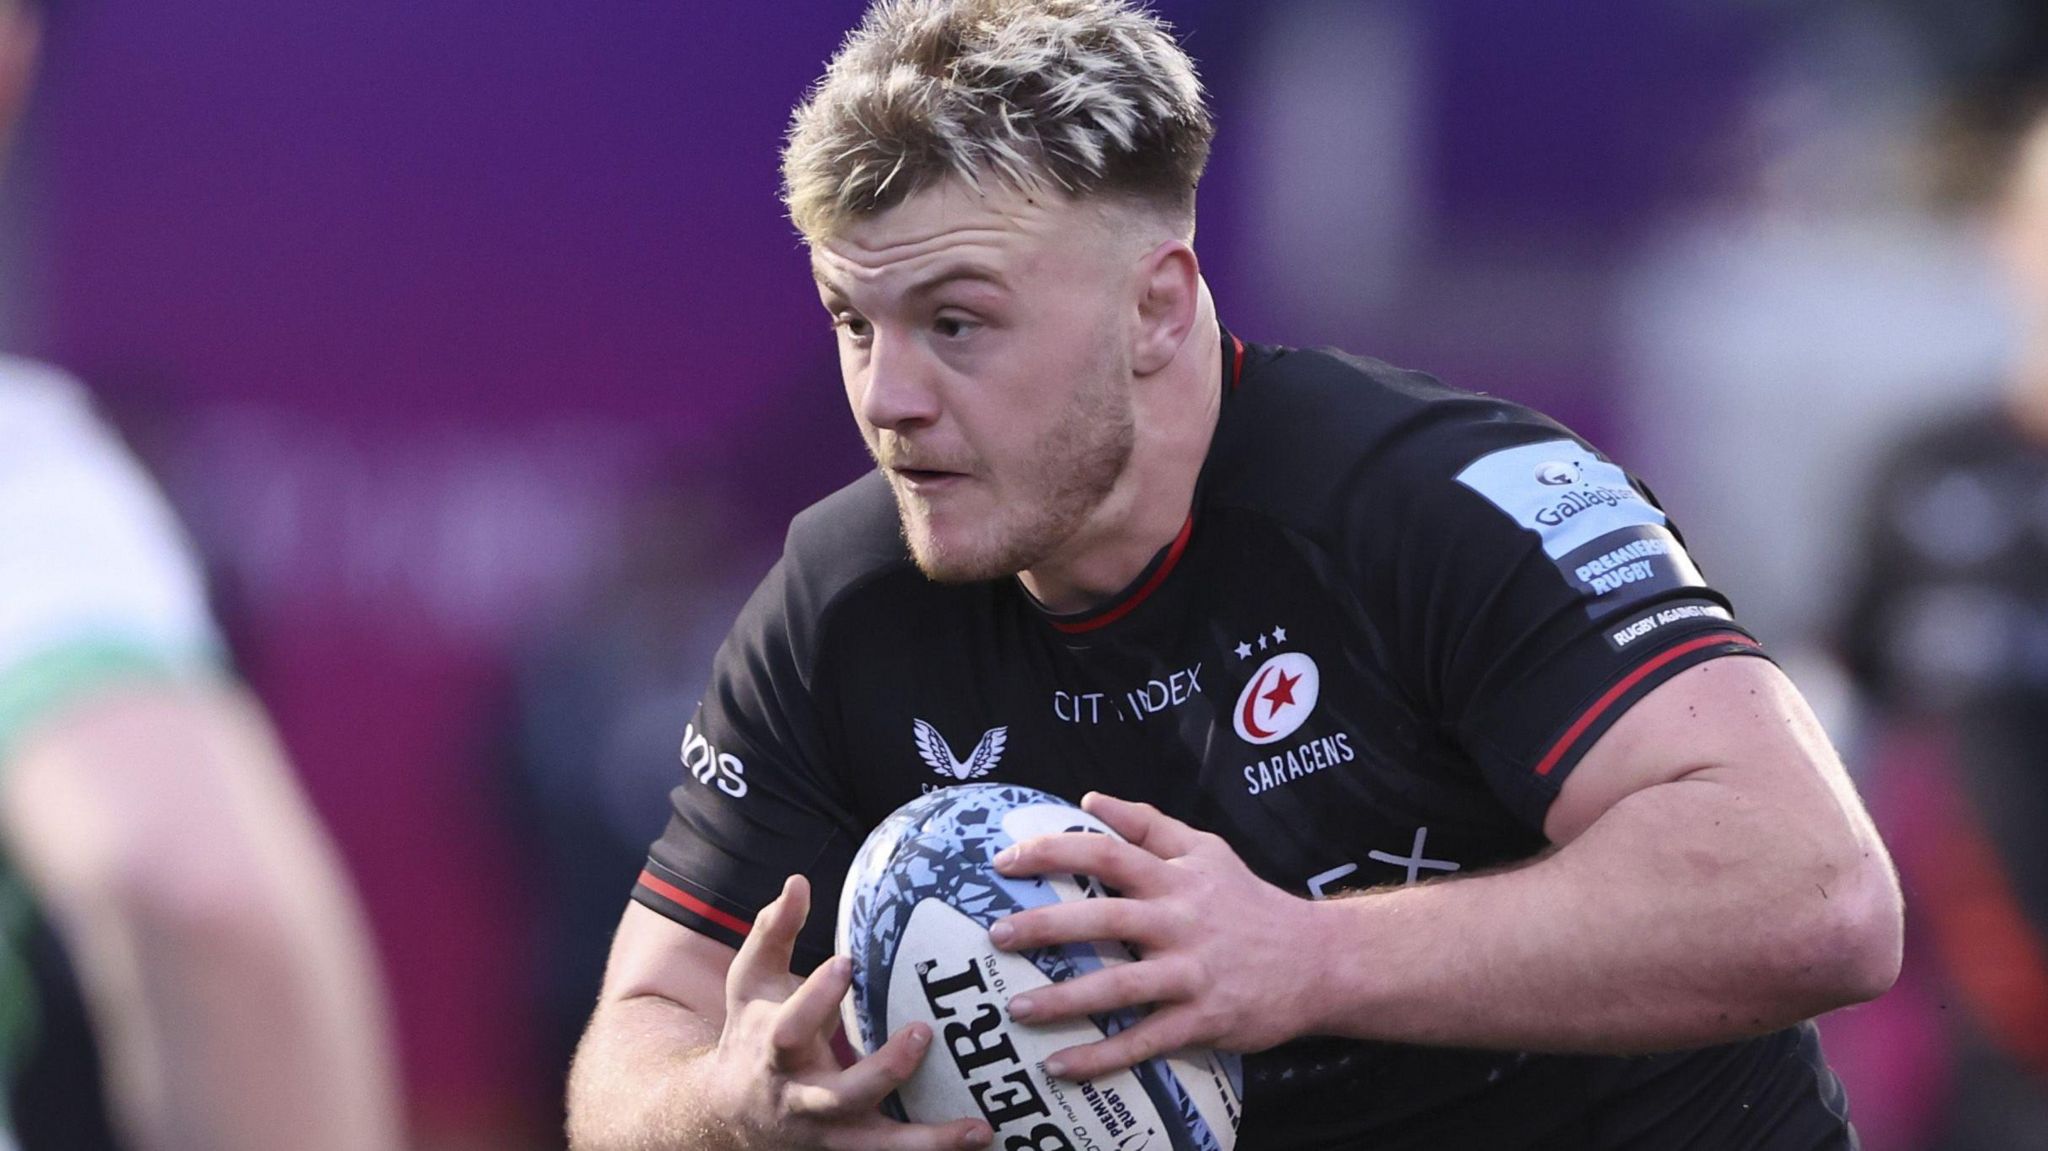 Toby Knight in action for Saracens